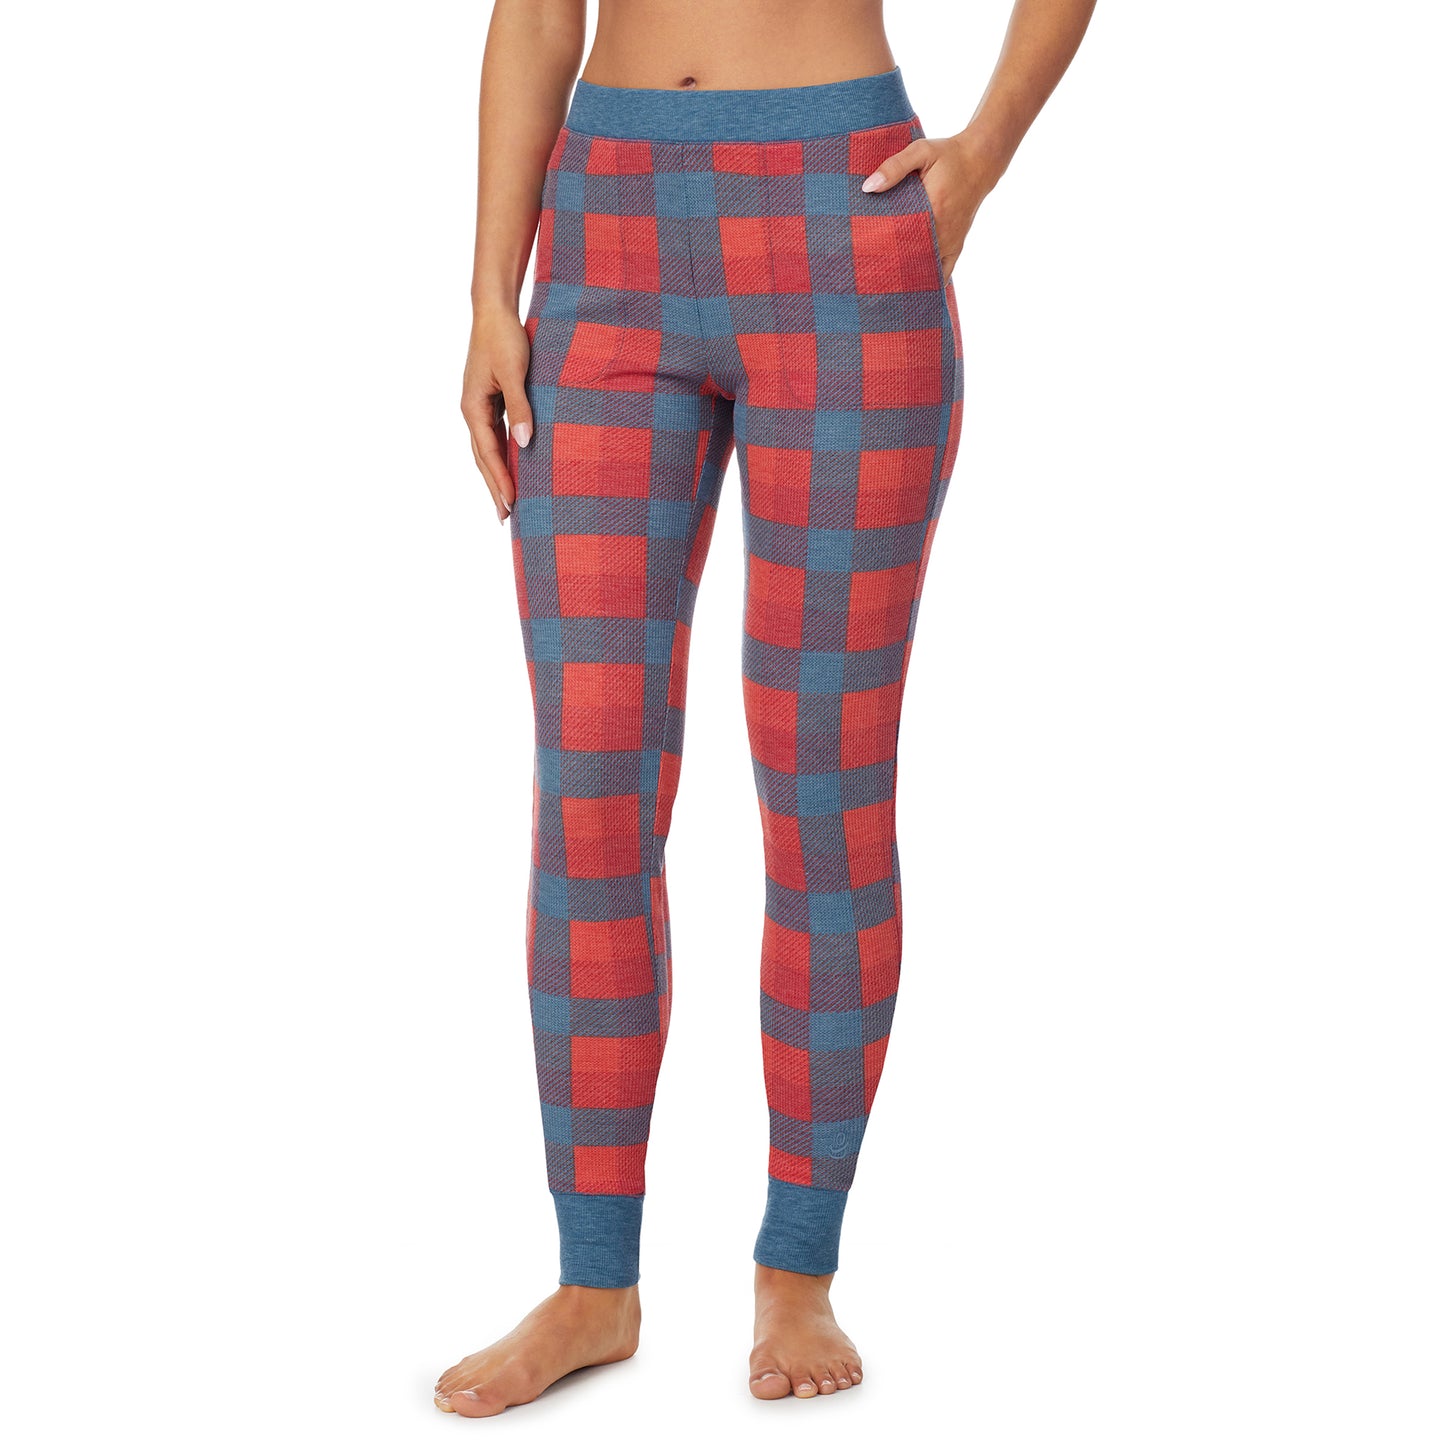 Red Blue Buffalo Check;Boysenberry Purple;Model is wearing size S. She is 5’9”, Bust 32”, Waist 25”, Hips 35”.@ A lady wearingStretch Thermal Legging with Red Blue Buffalo Check print